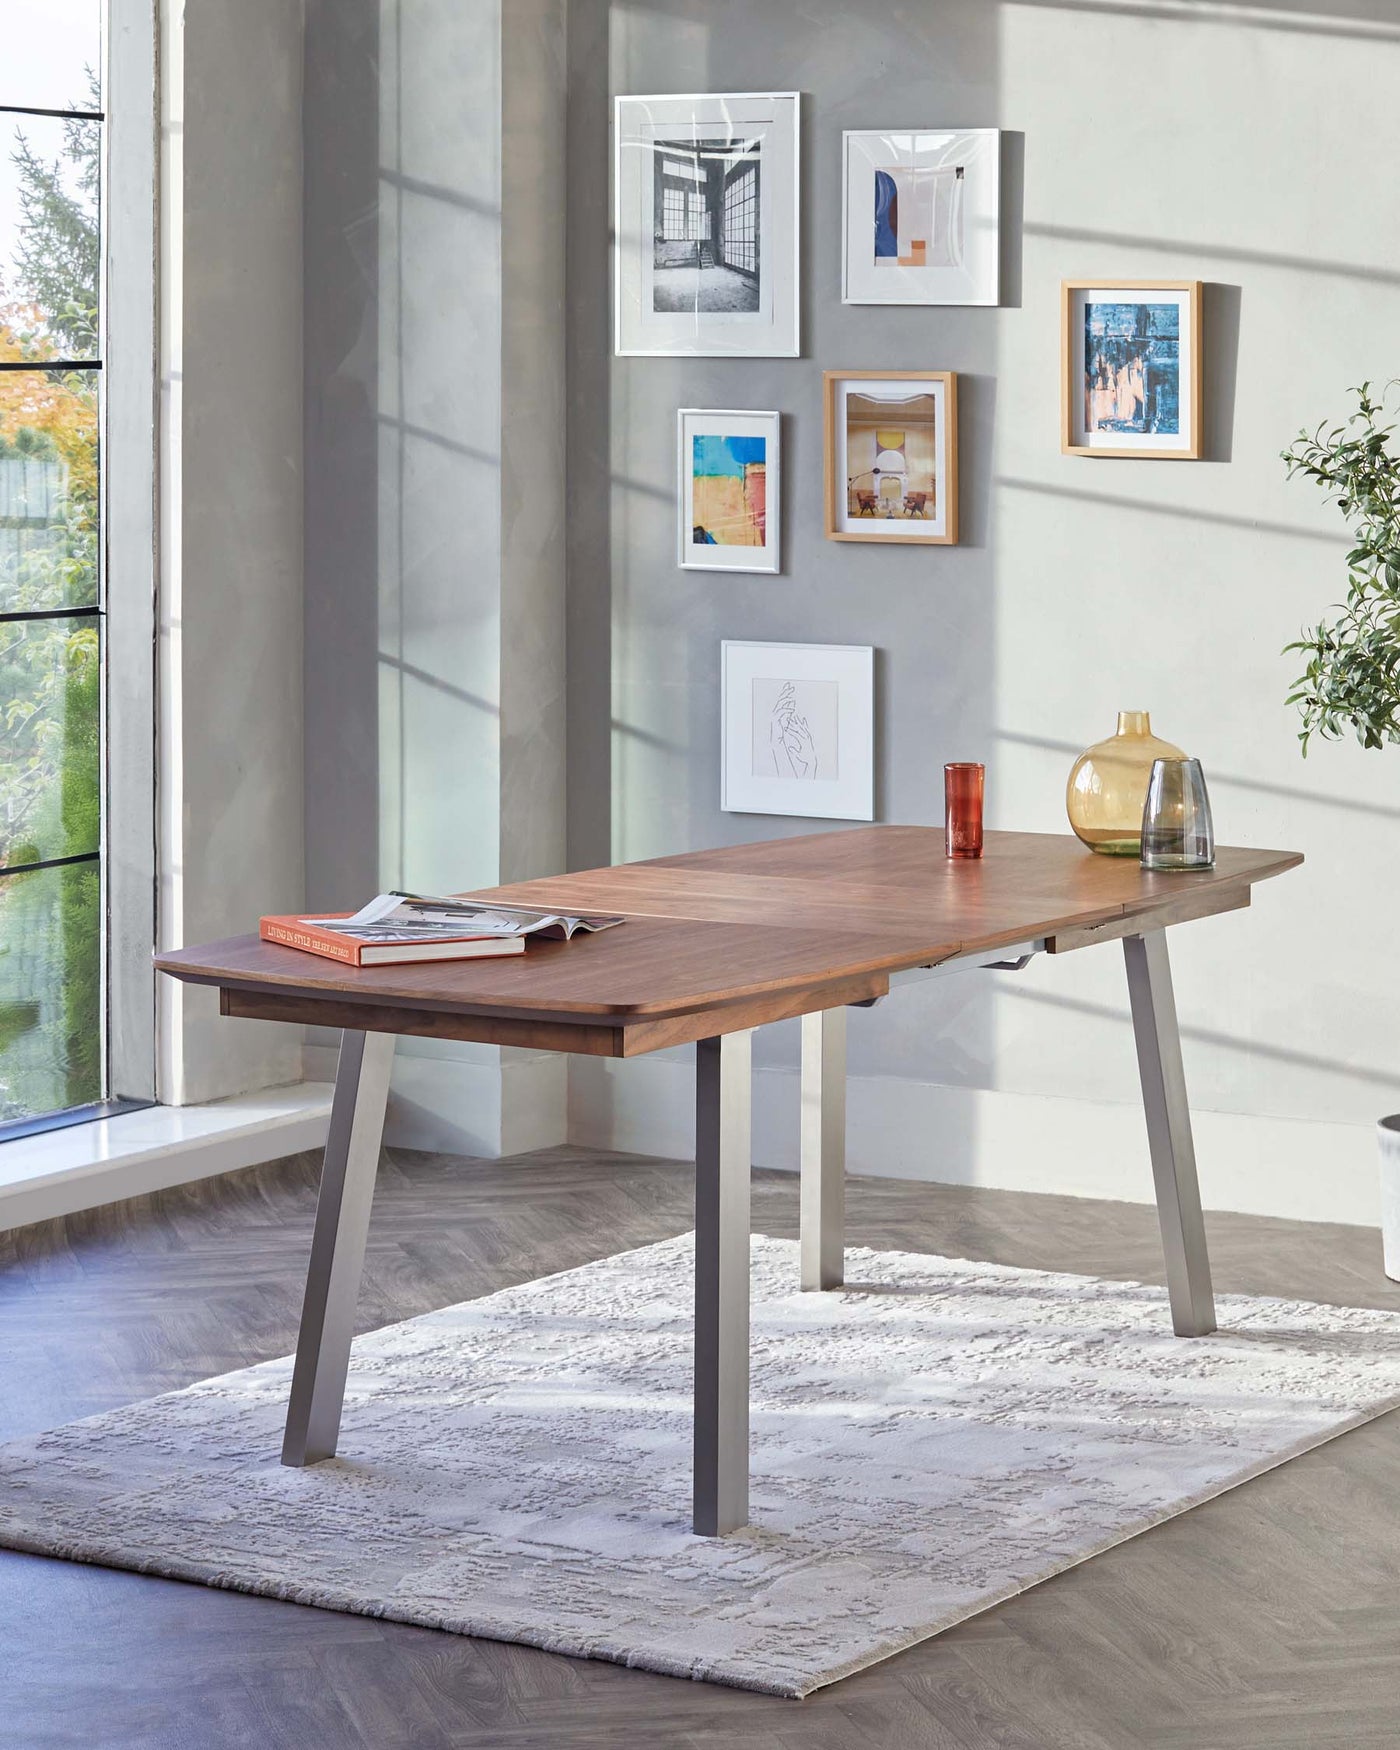 Modern wooden dining table with a warm, natural wood finish and contrasting sleek, grey metal legs, presented in a bright room with natural light. A minimalistic design aesthetic is emphasized by a few decorative items on the tabletop and framed artworks on the wall. The table is situated on a textured white area rug that softens the room's ambiance.